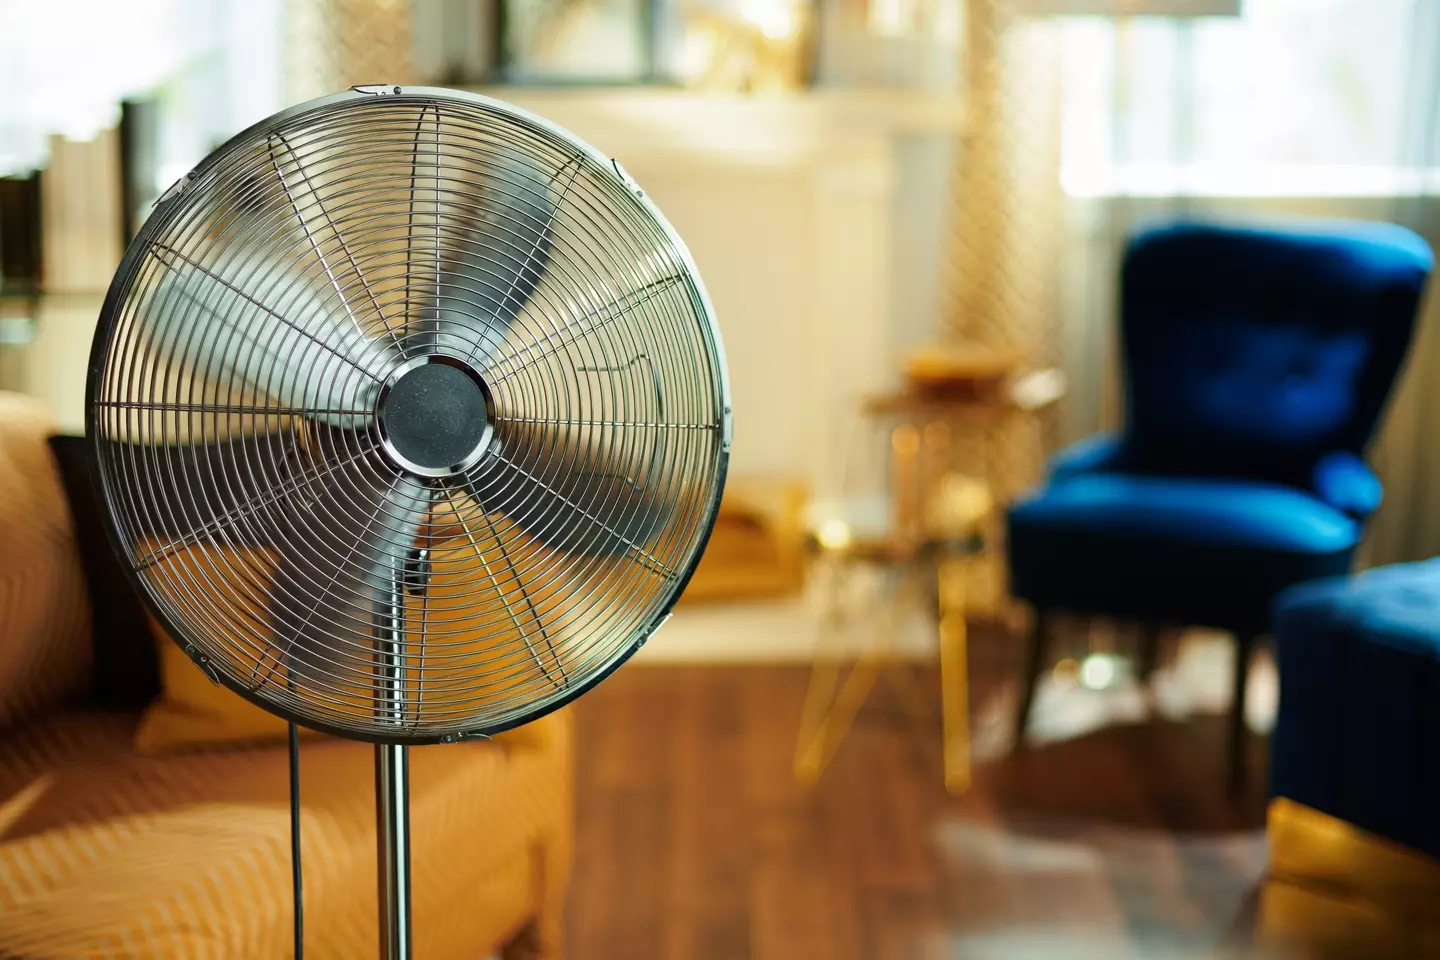 Keeping the fan on at night might not be a good thing. (Getty Stock Images)